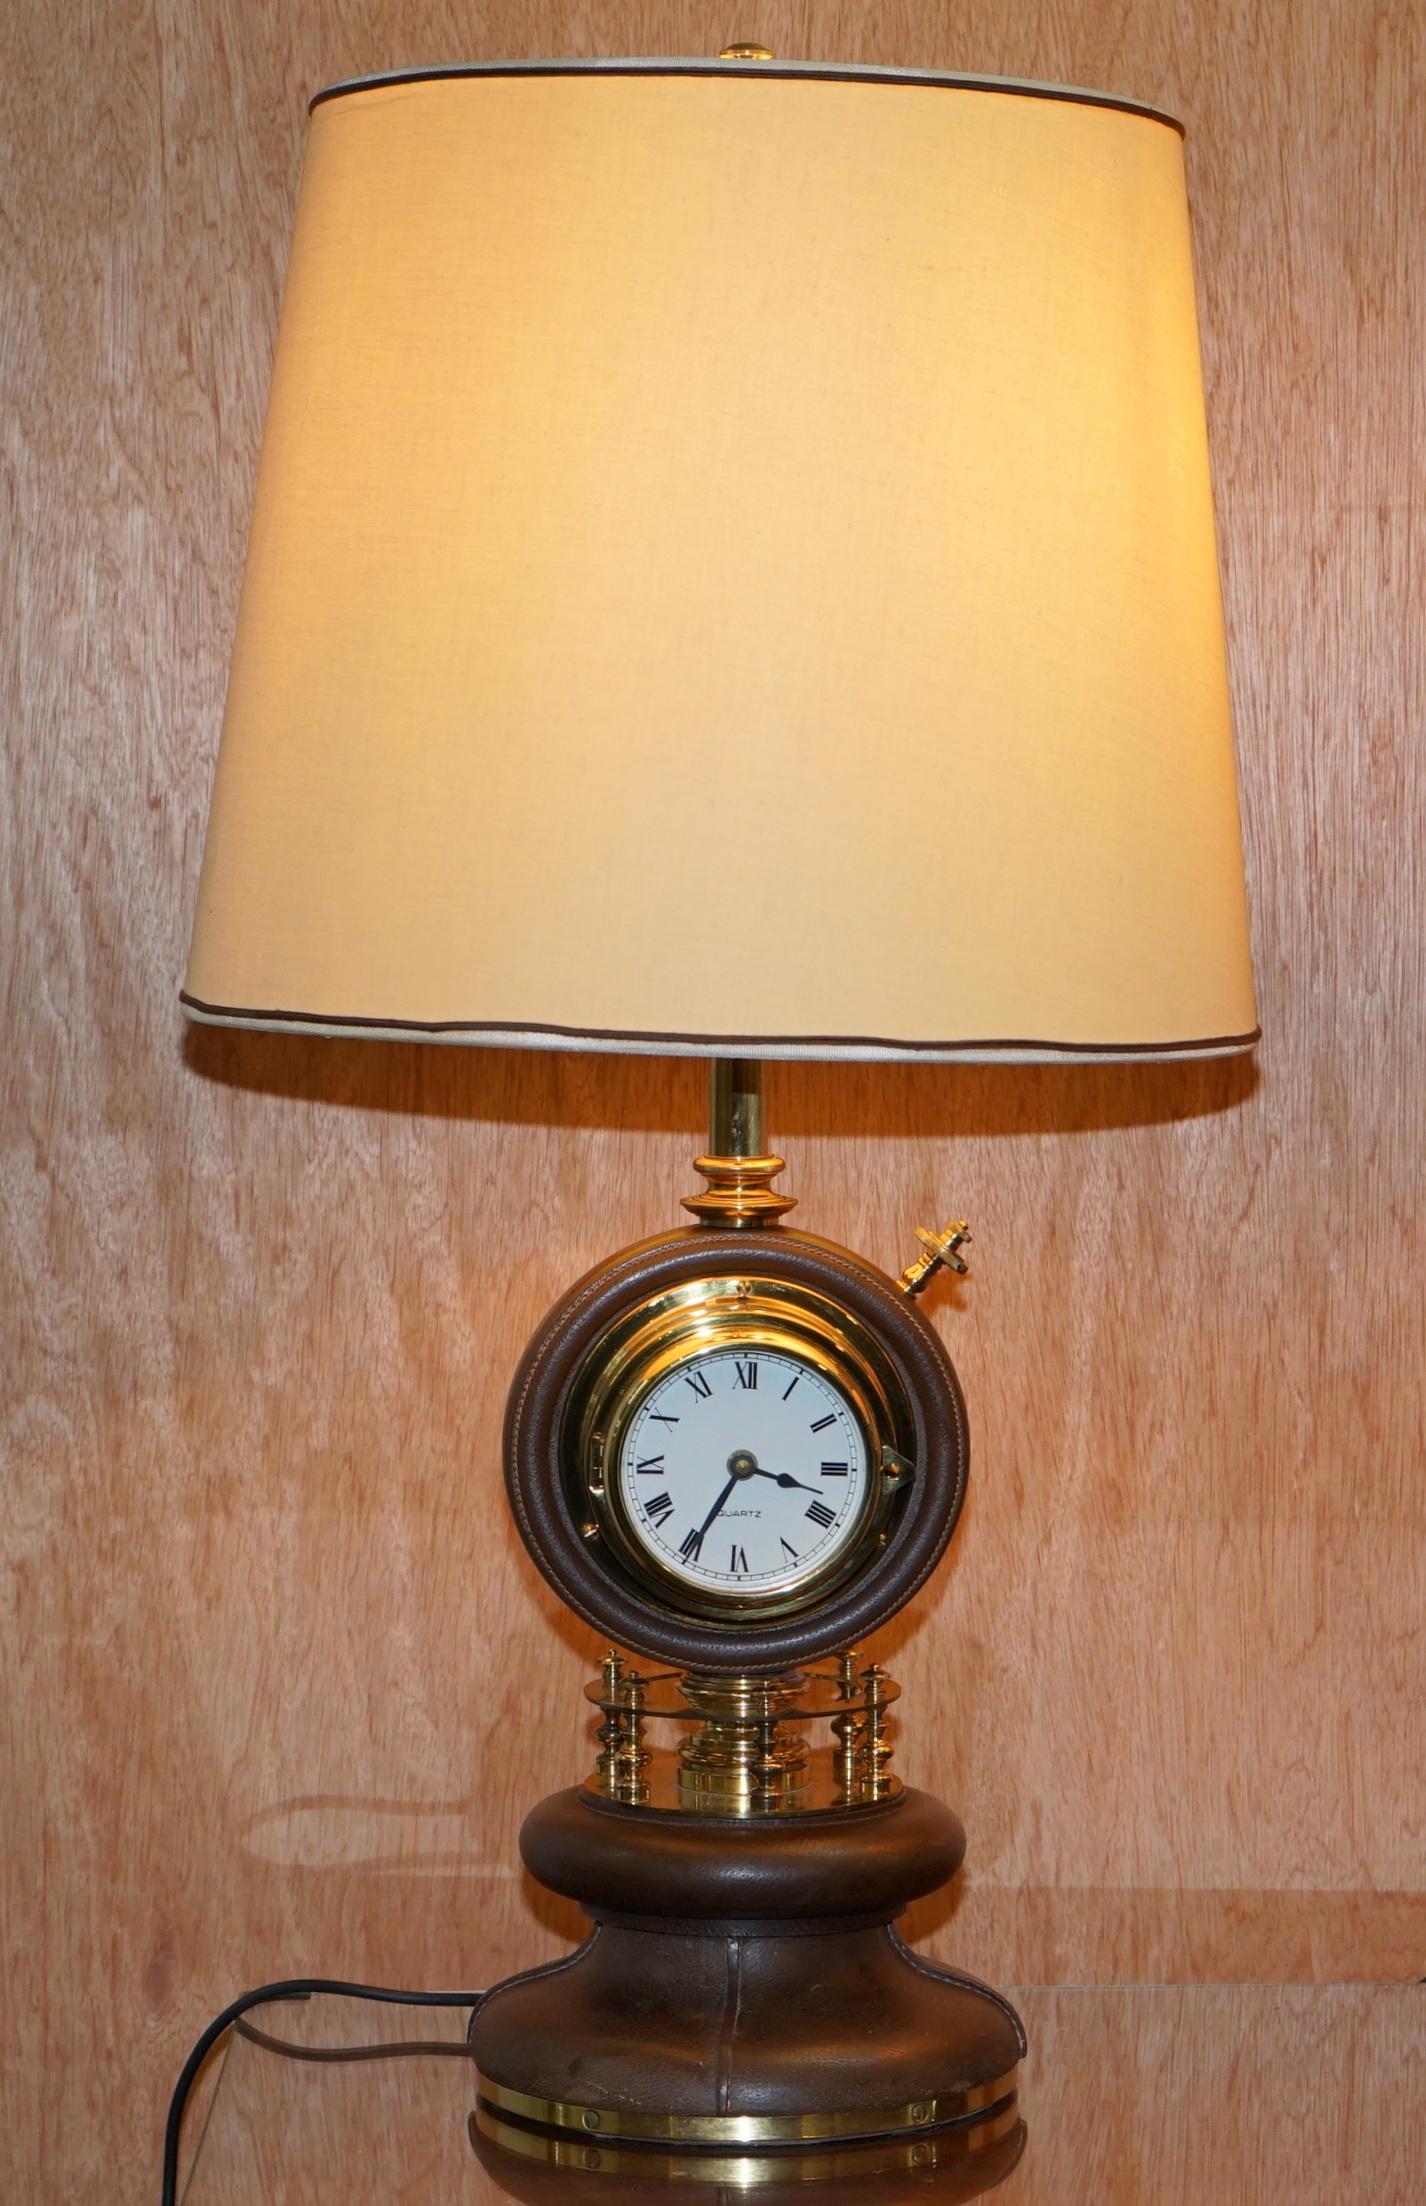 We are delighted to offer for sale this stunning and very rare pair of original 1965 Gucci leather and brass table lamps with revolving clocks and barometers

A highly collectable and well made pair, solid brass with brown leather which has been